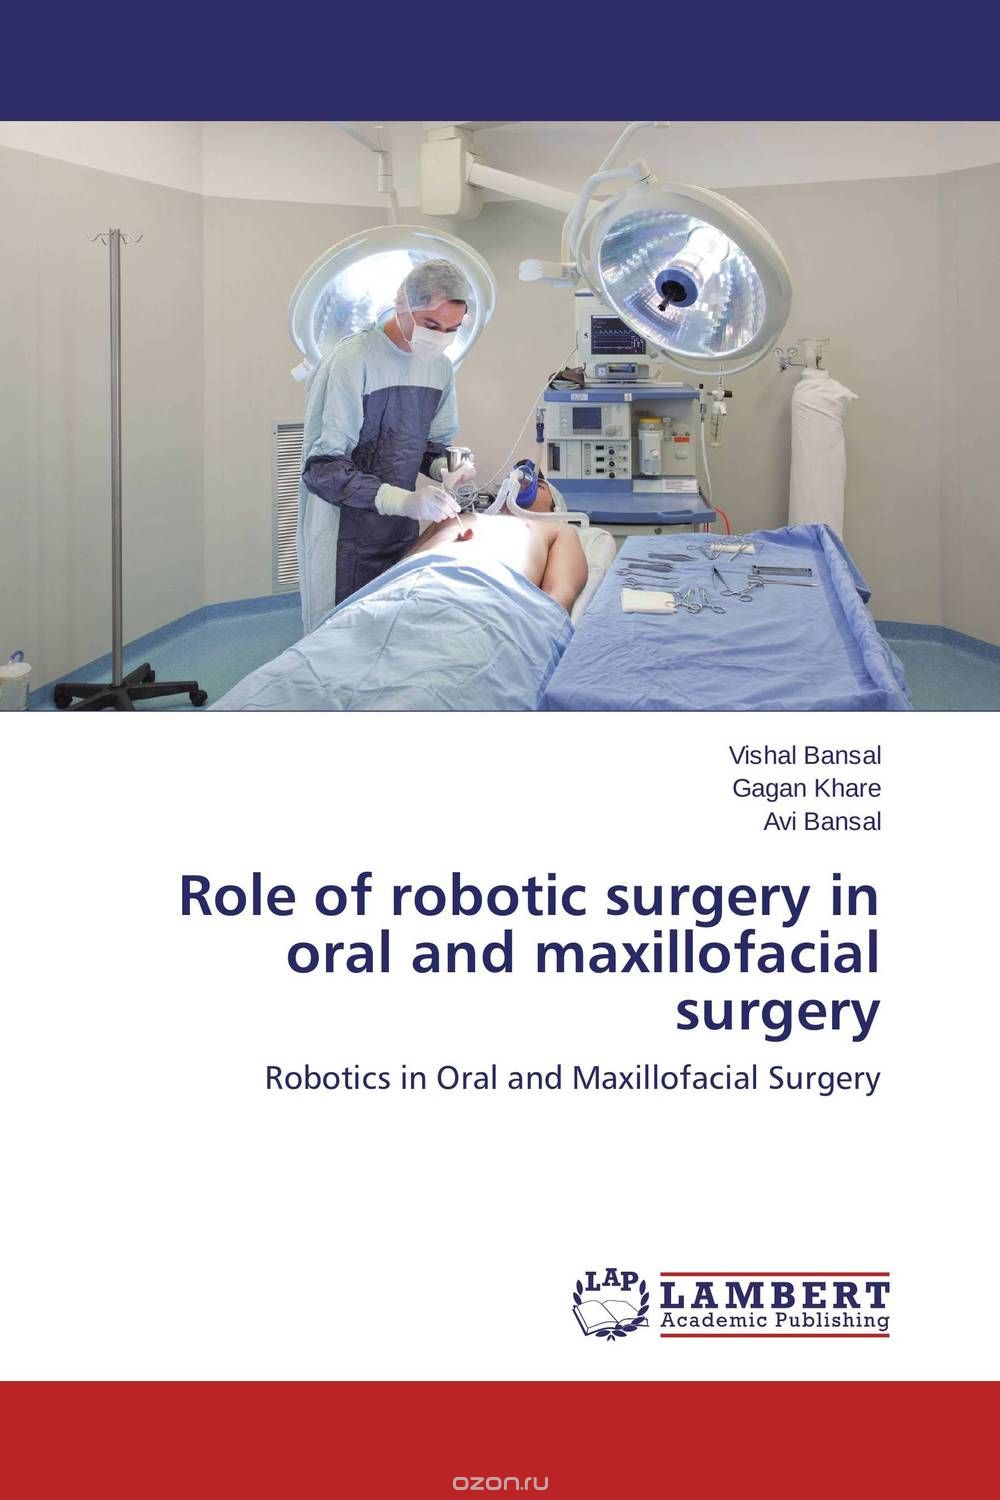 Скачать книгу "Role of robotic surgery in oral and maxillofacial surgery"